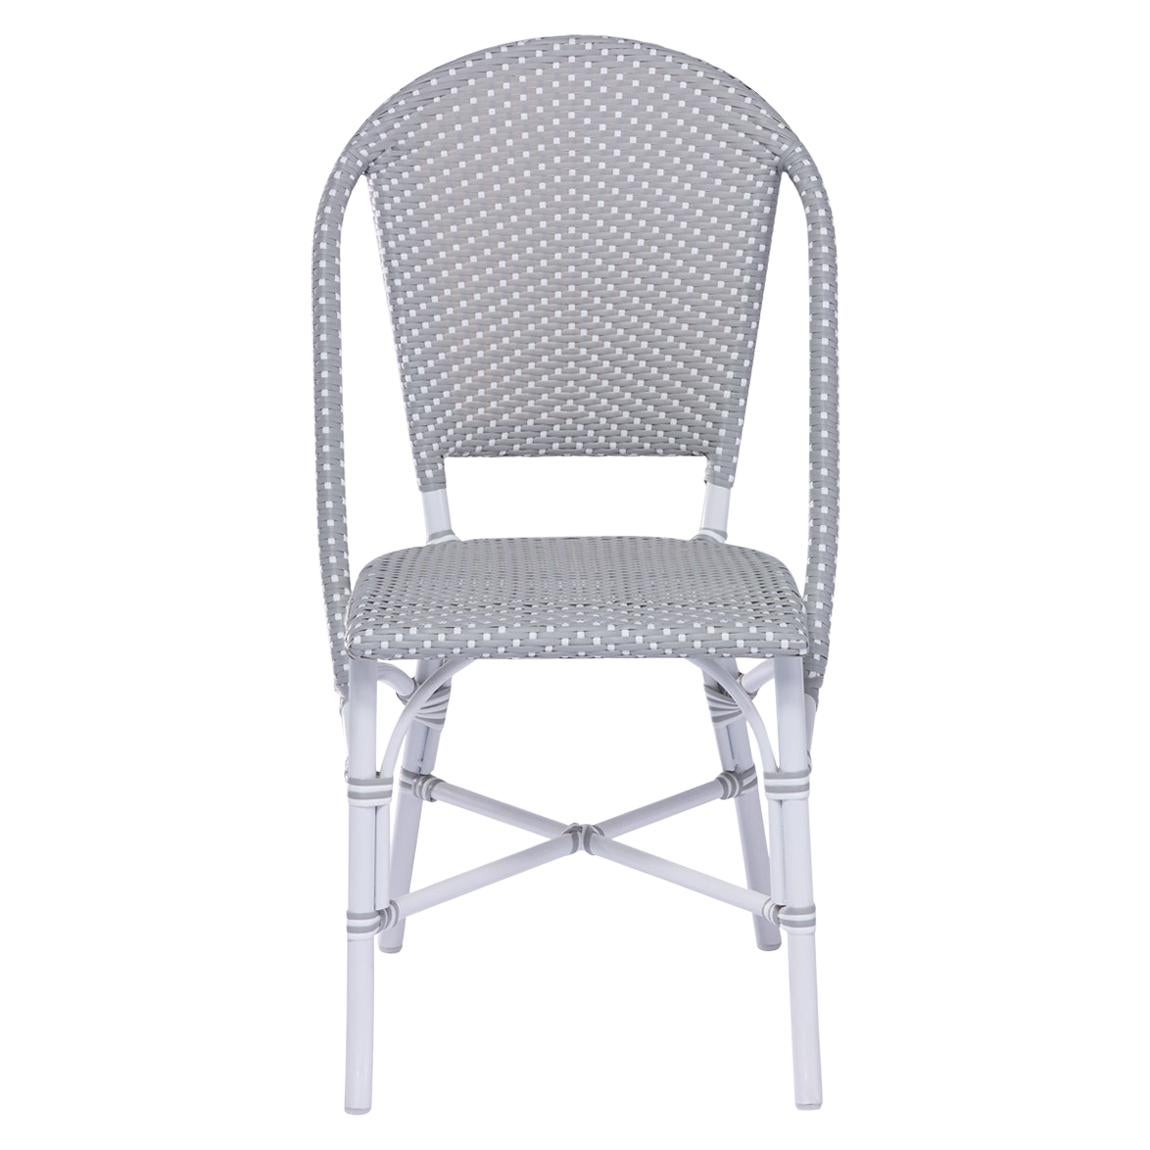 Sika Design Sofie Rattan Outdoor Bistro Side Chair in Grey with White Dots